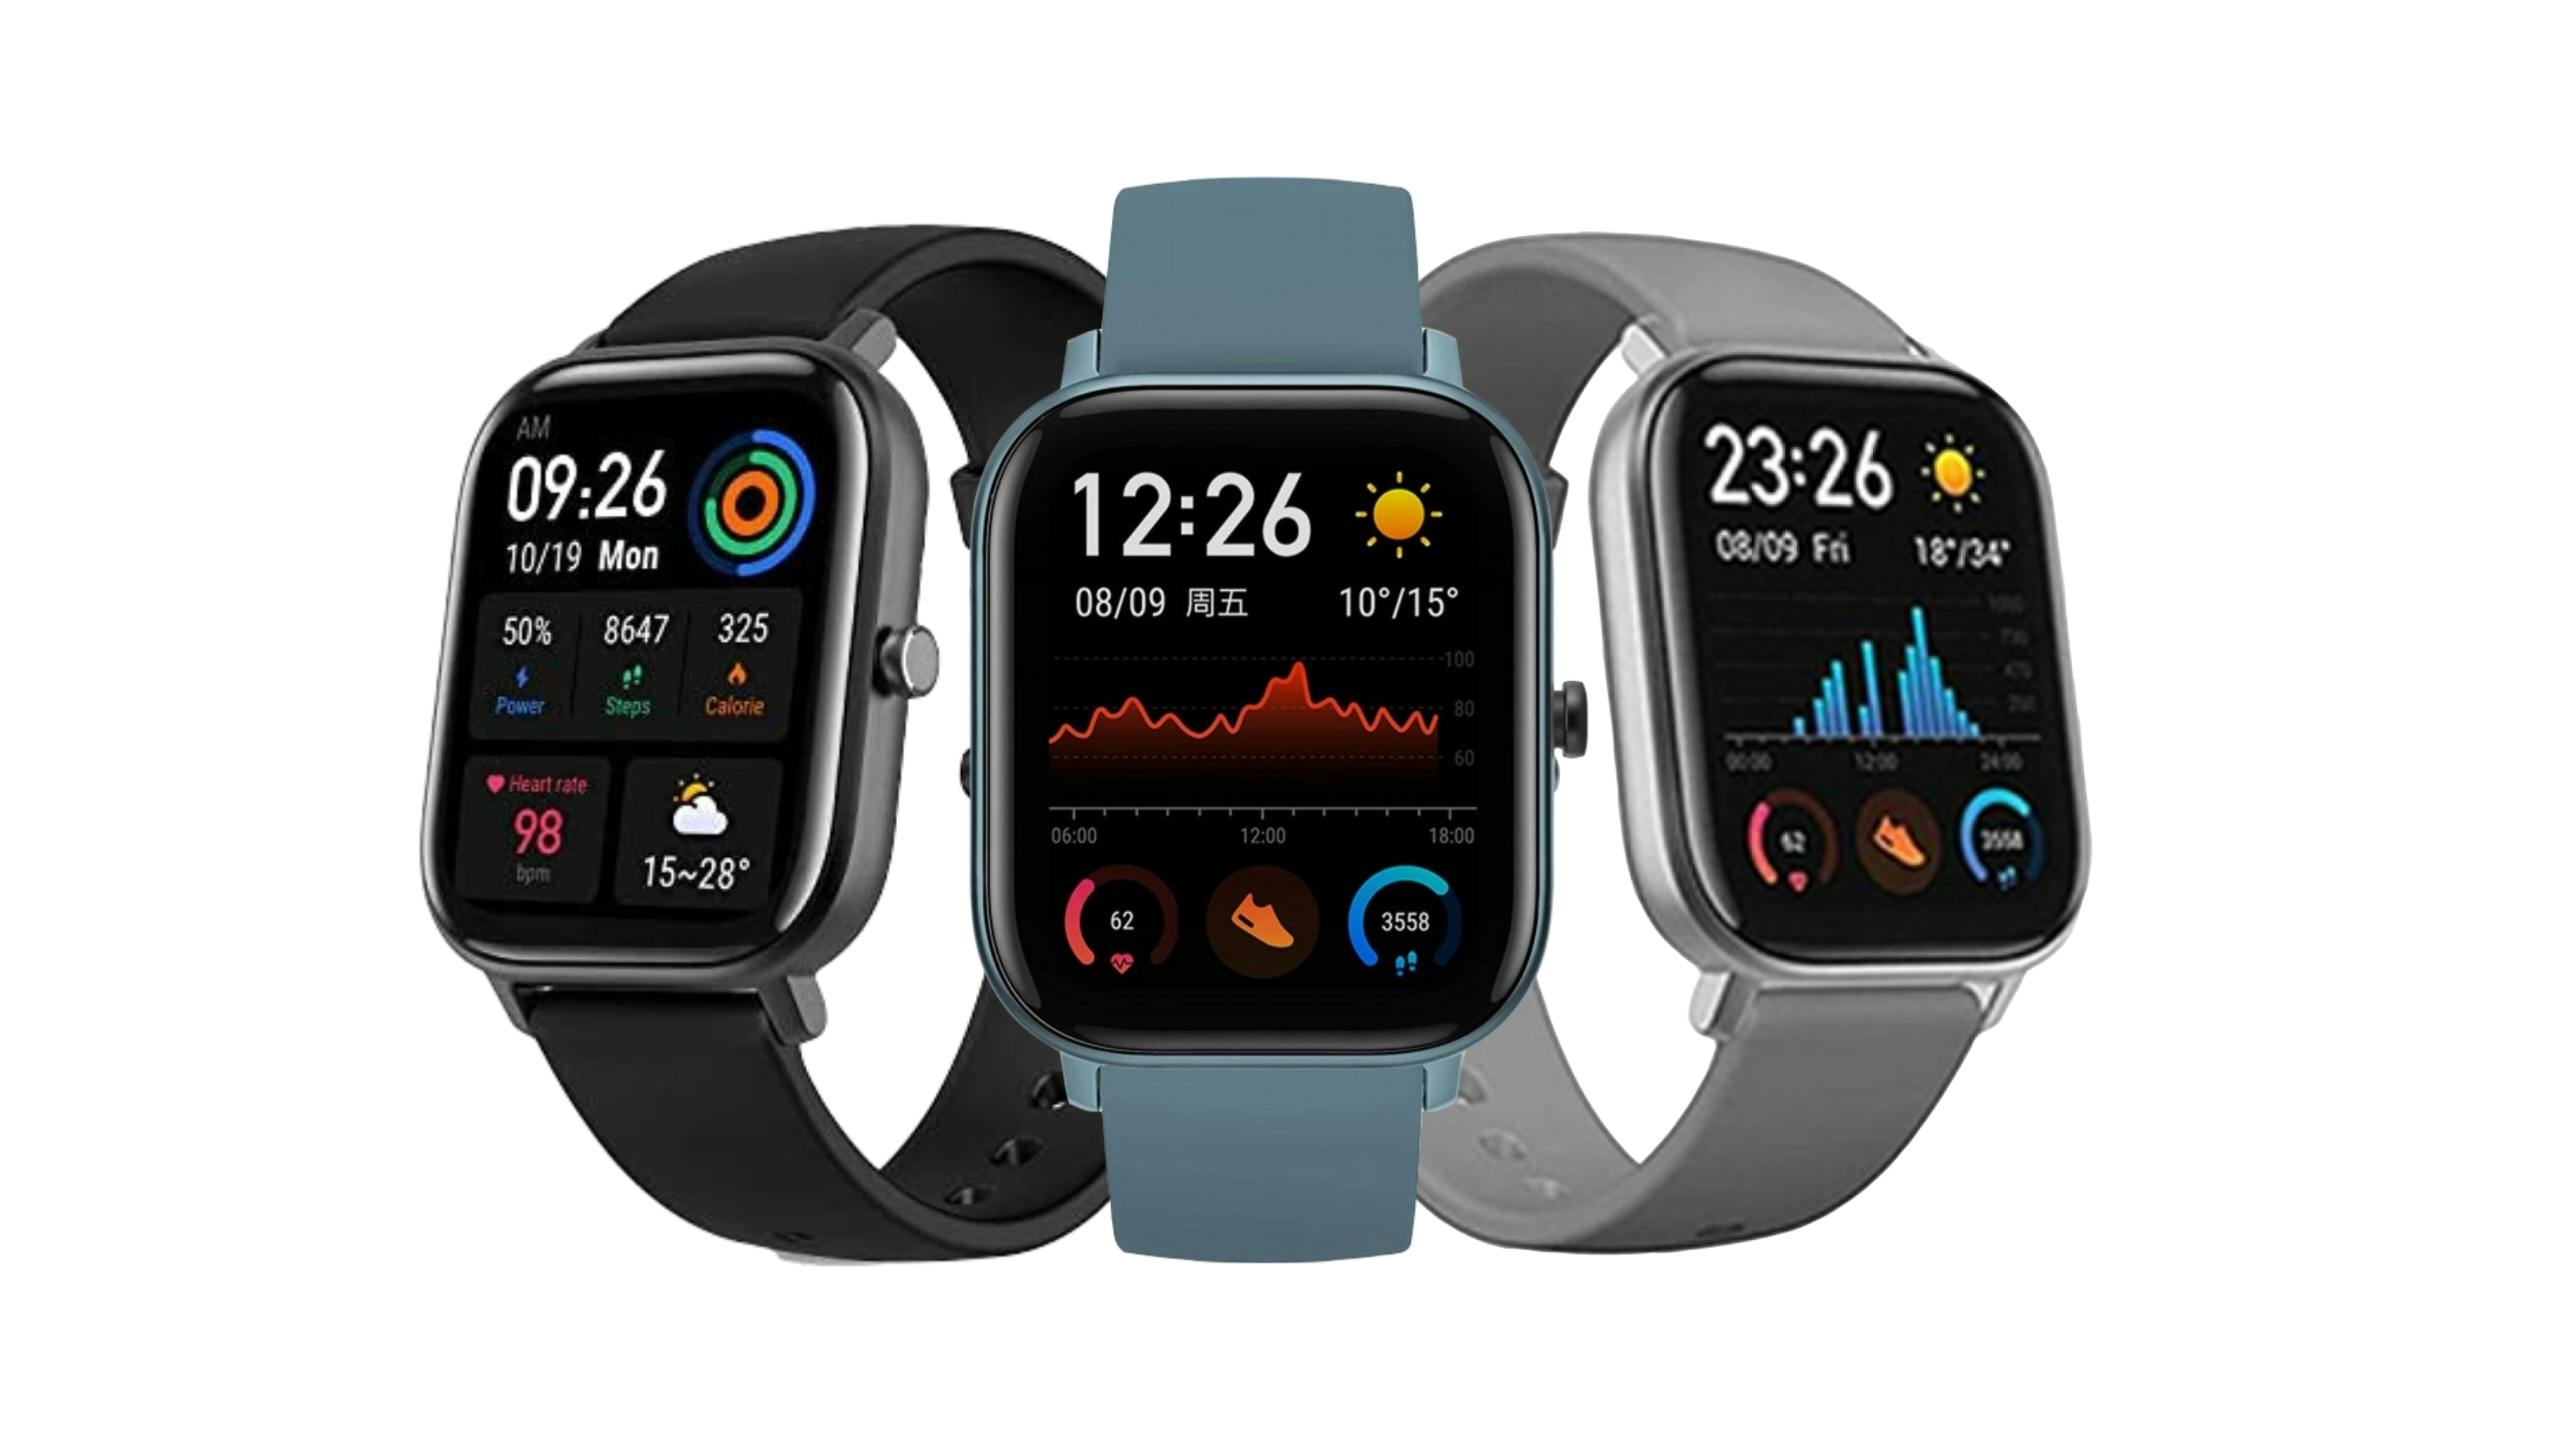 https://res.cloudinary.com/all-roundreview/image/upload/v1647867960/reviews/the-amazfit-gts.jpg